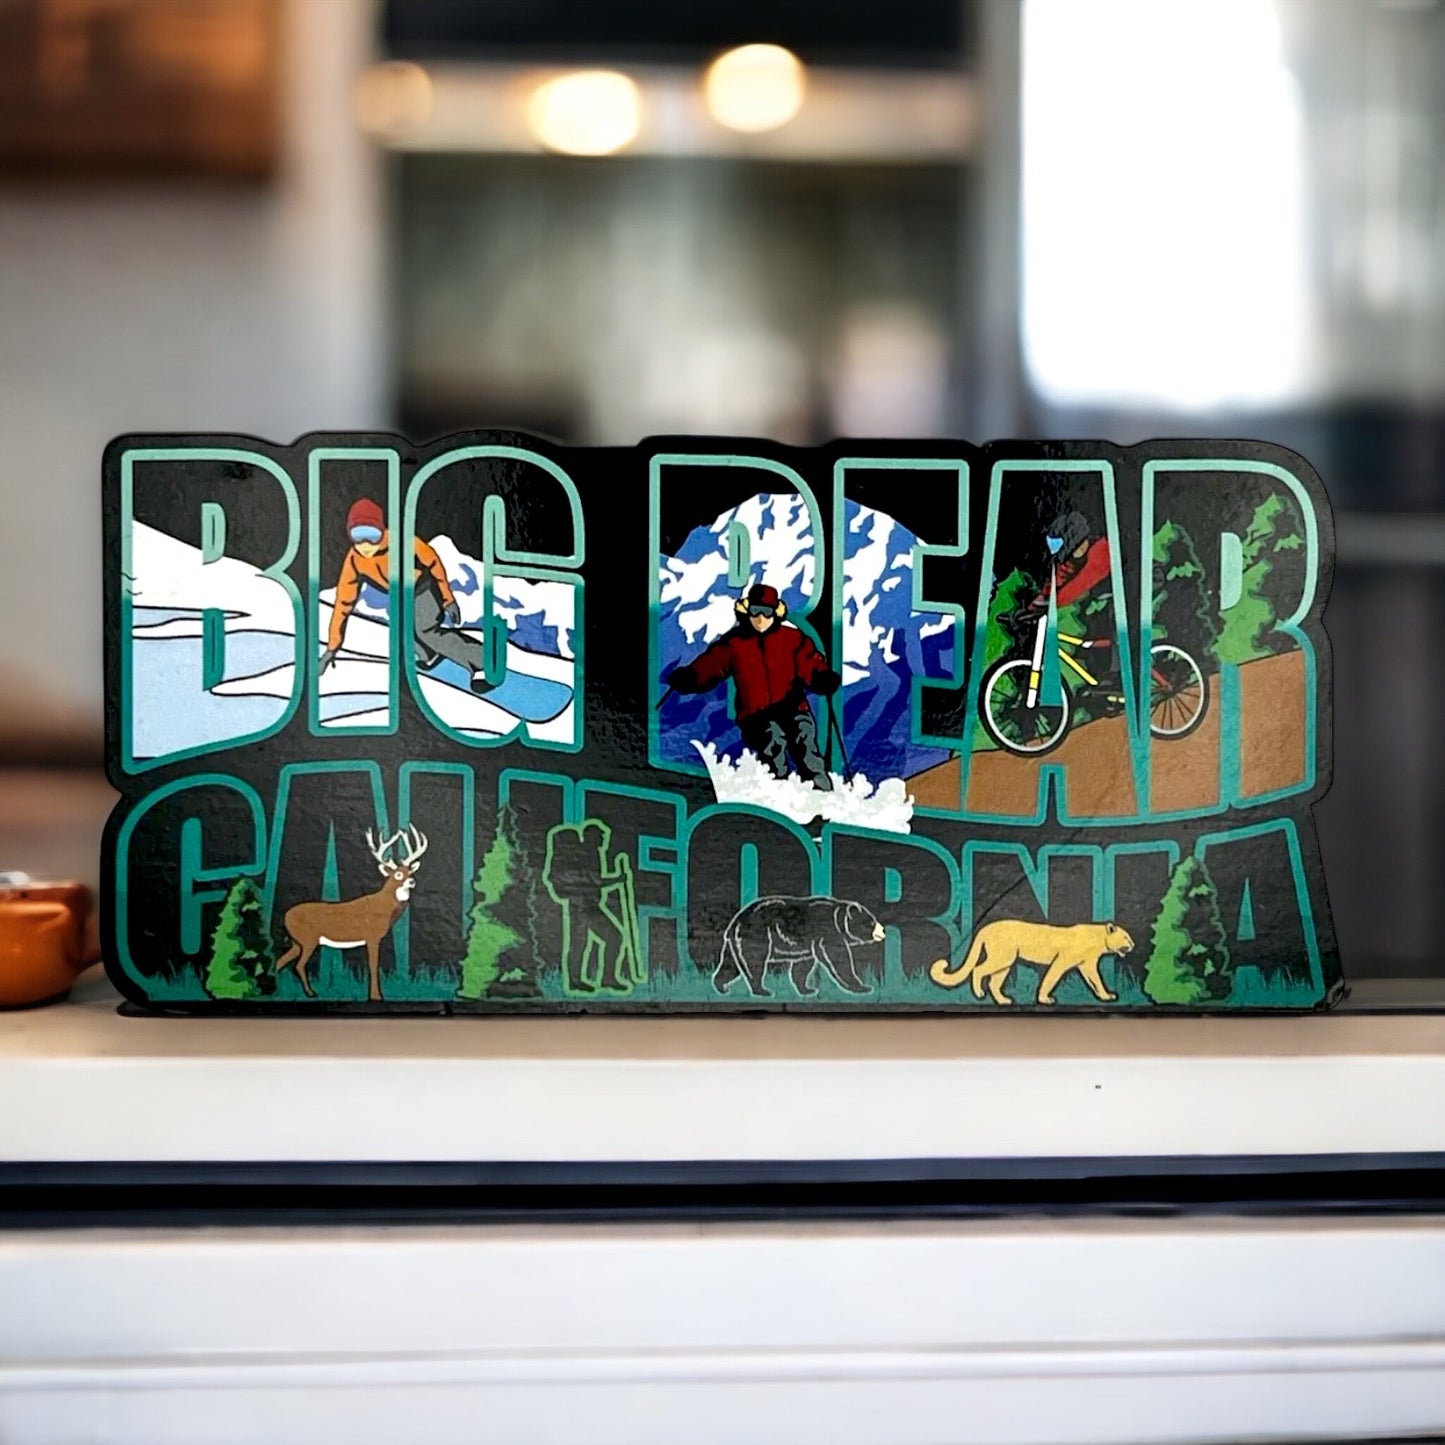 Big Bear California written on a magnet with snowboard and mountain biking activities in the letters